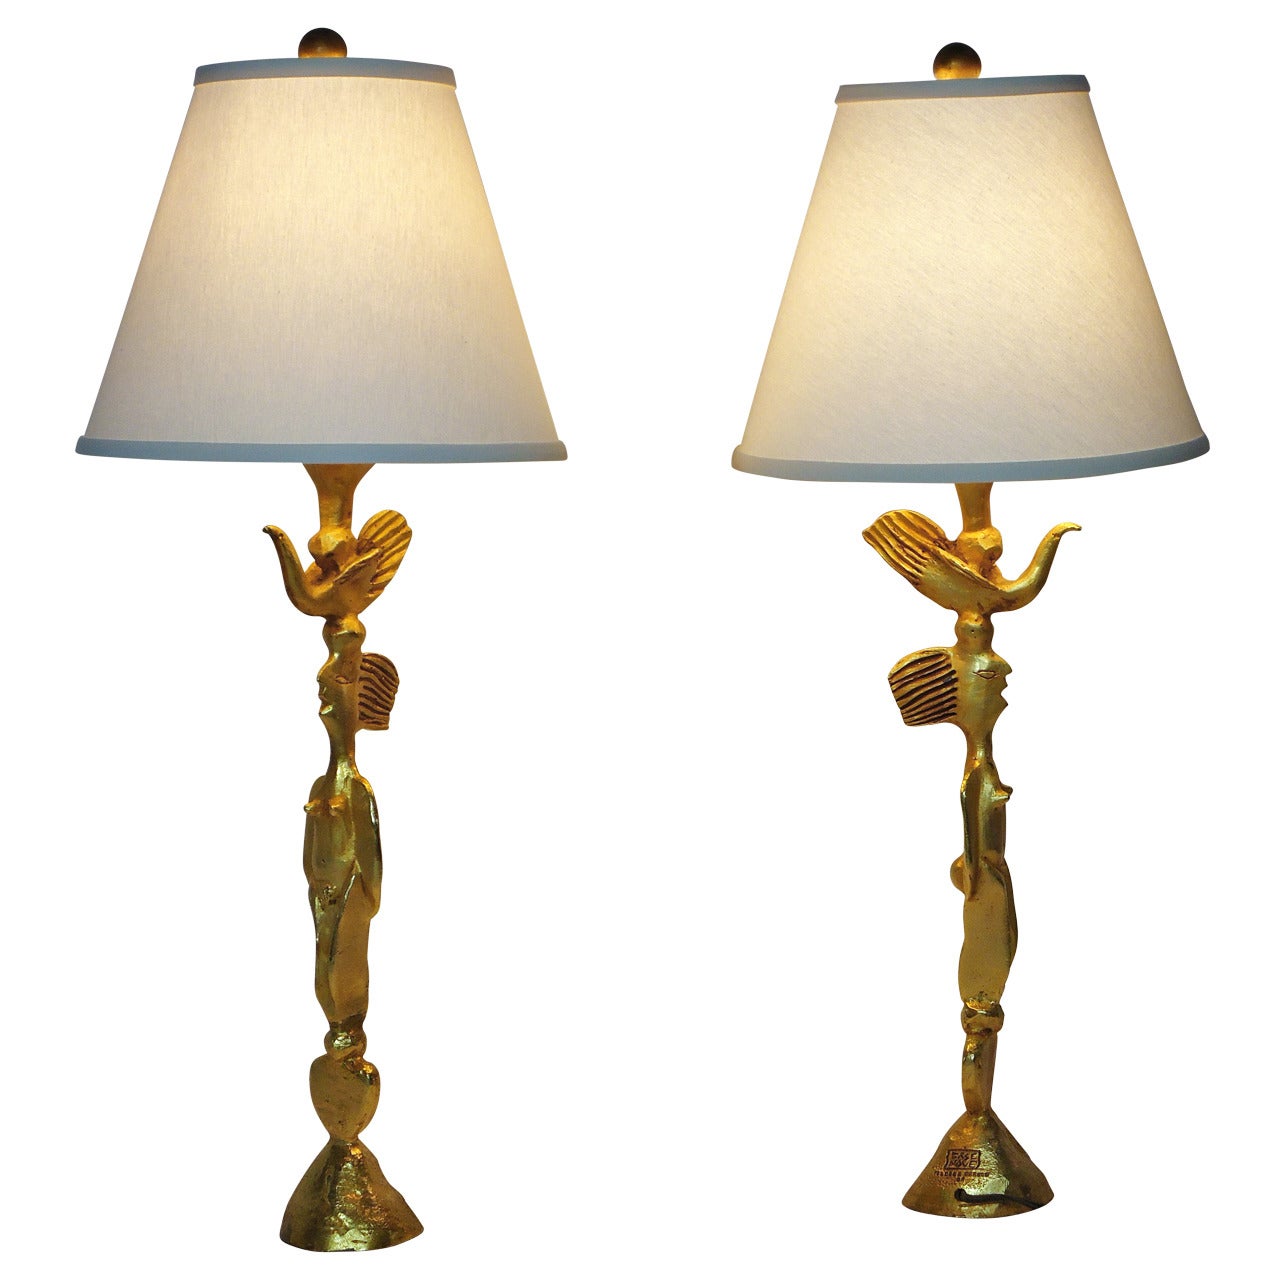 Rare Pair of Pierre Casenove Gold Leafed Cast Bronze Table Lamps, circa 1992